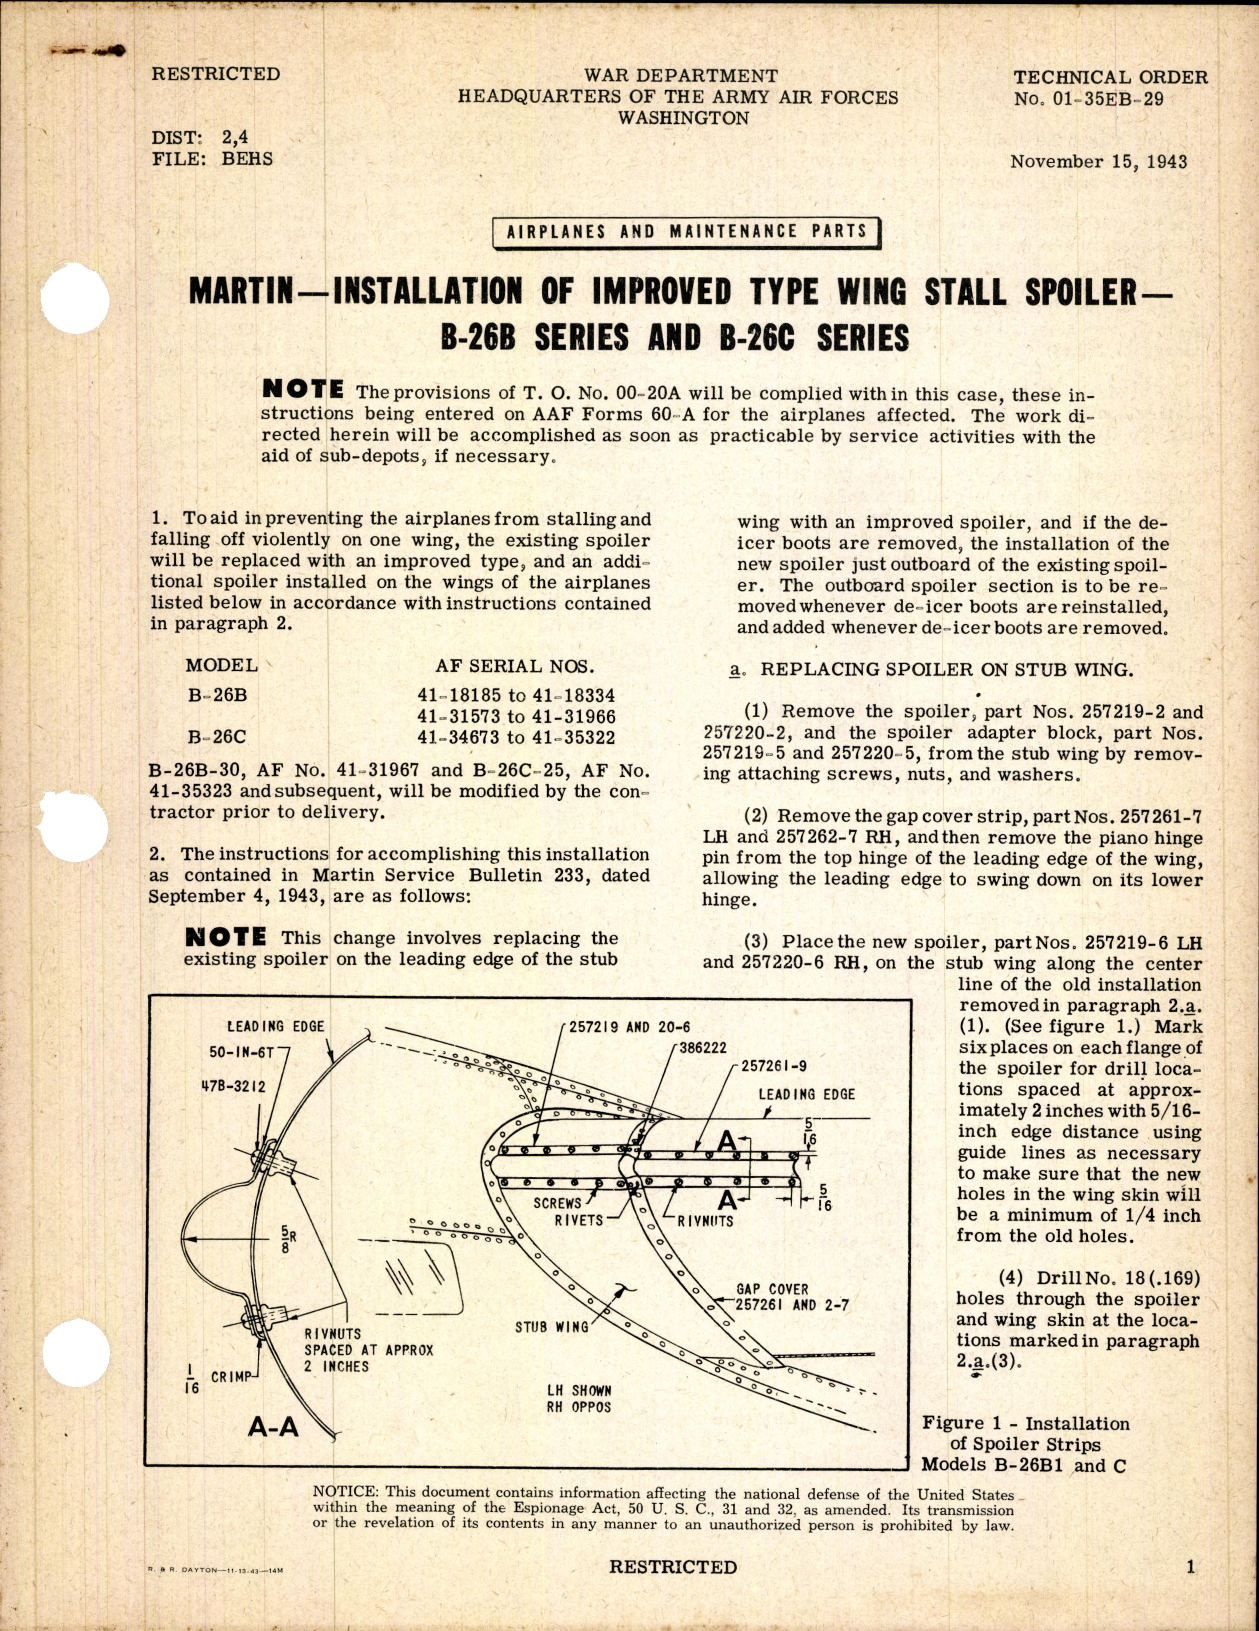 Sample page 1 from AirCorps Library document: Installation of Improved Type Wing Stall Spoiler for B-26B and B-26C Series